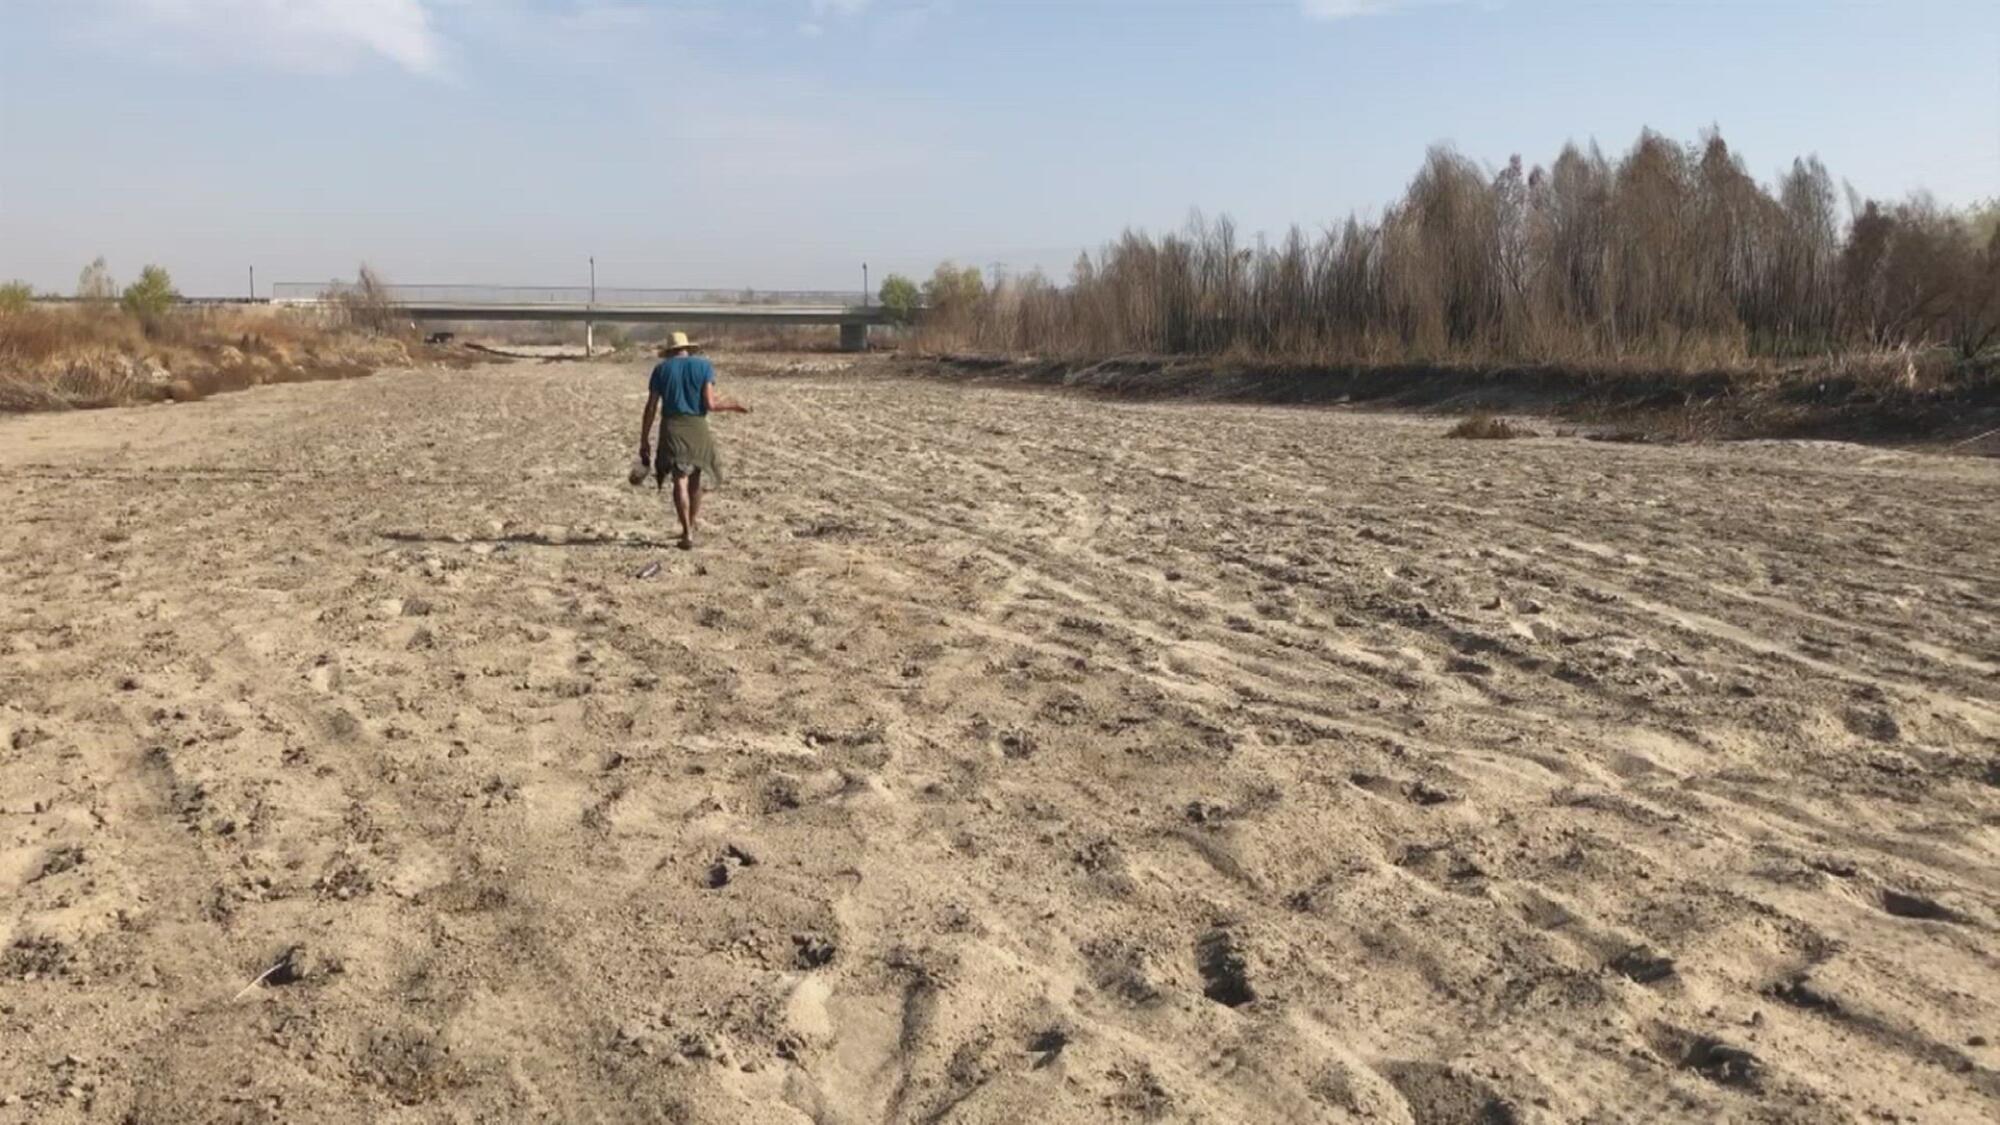 A man walks on a dry, sandy riverbed.